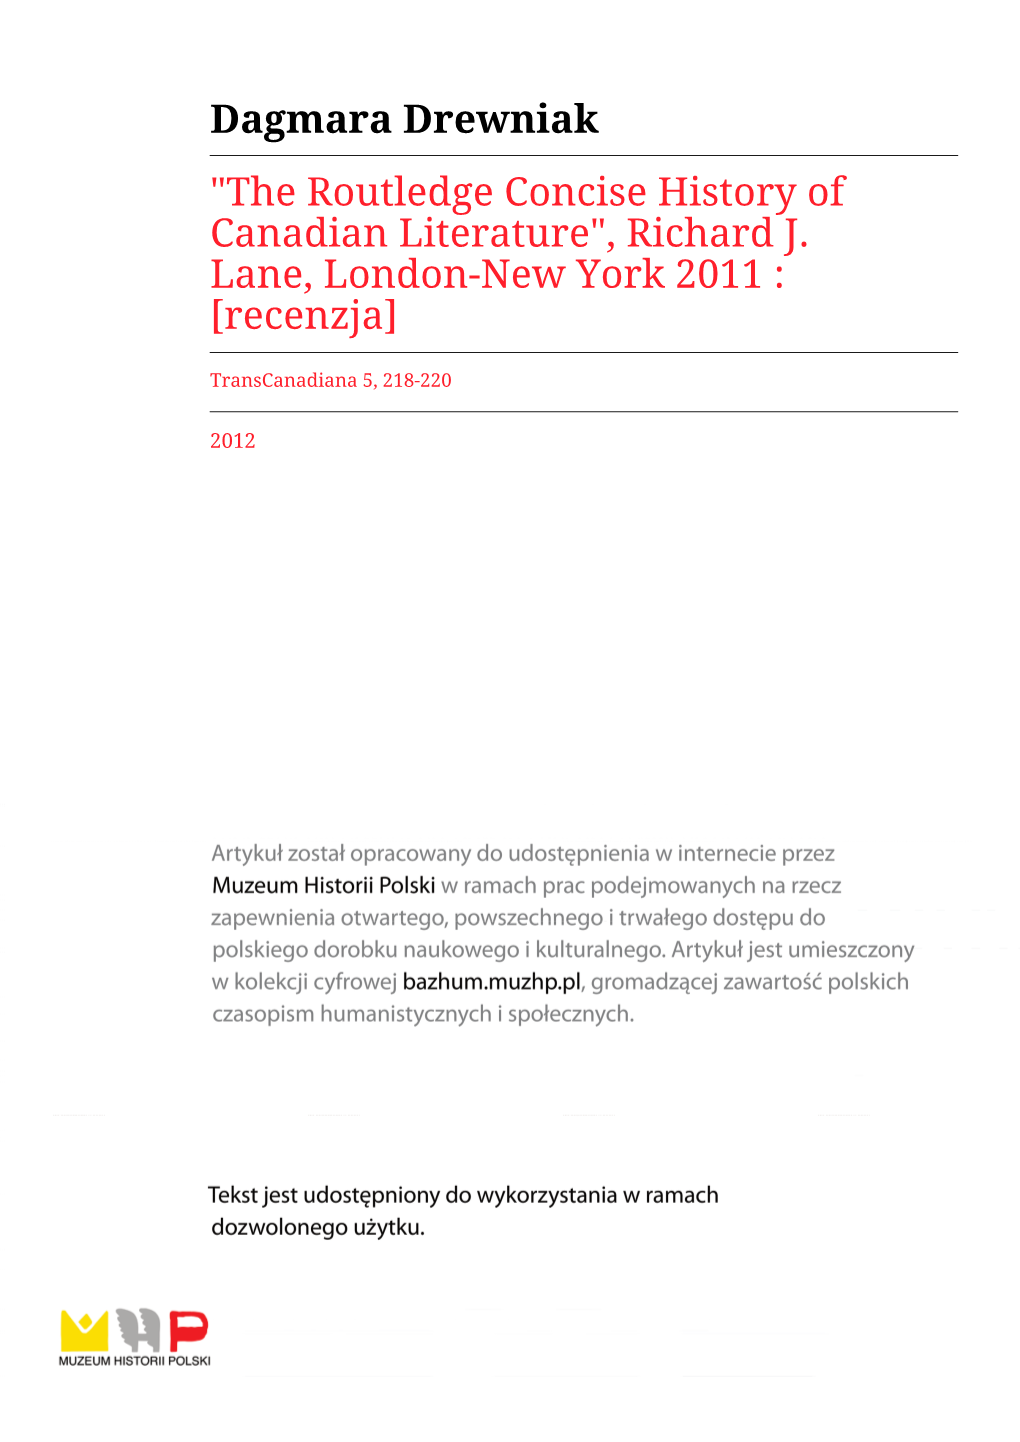 The Routledge Concise History of Canadian Literature", Richard J